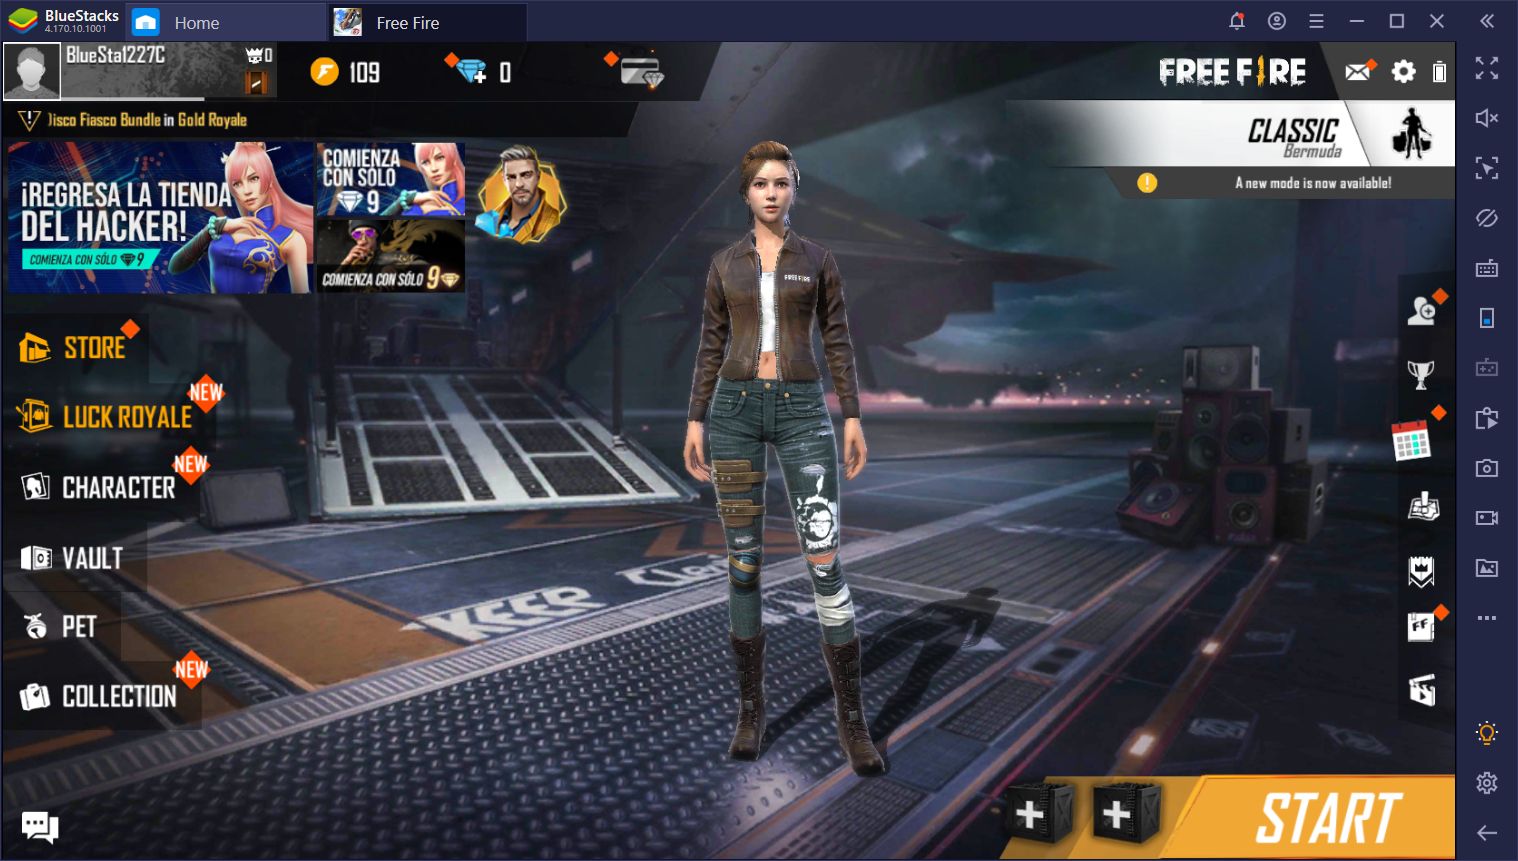 5 Best Characters In Free Fire Game In 2020 Bluestacks